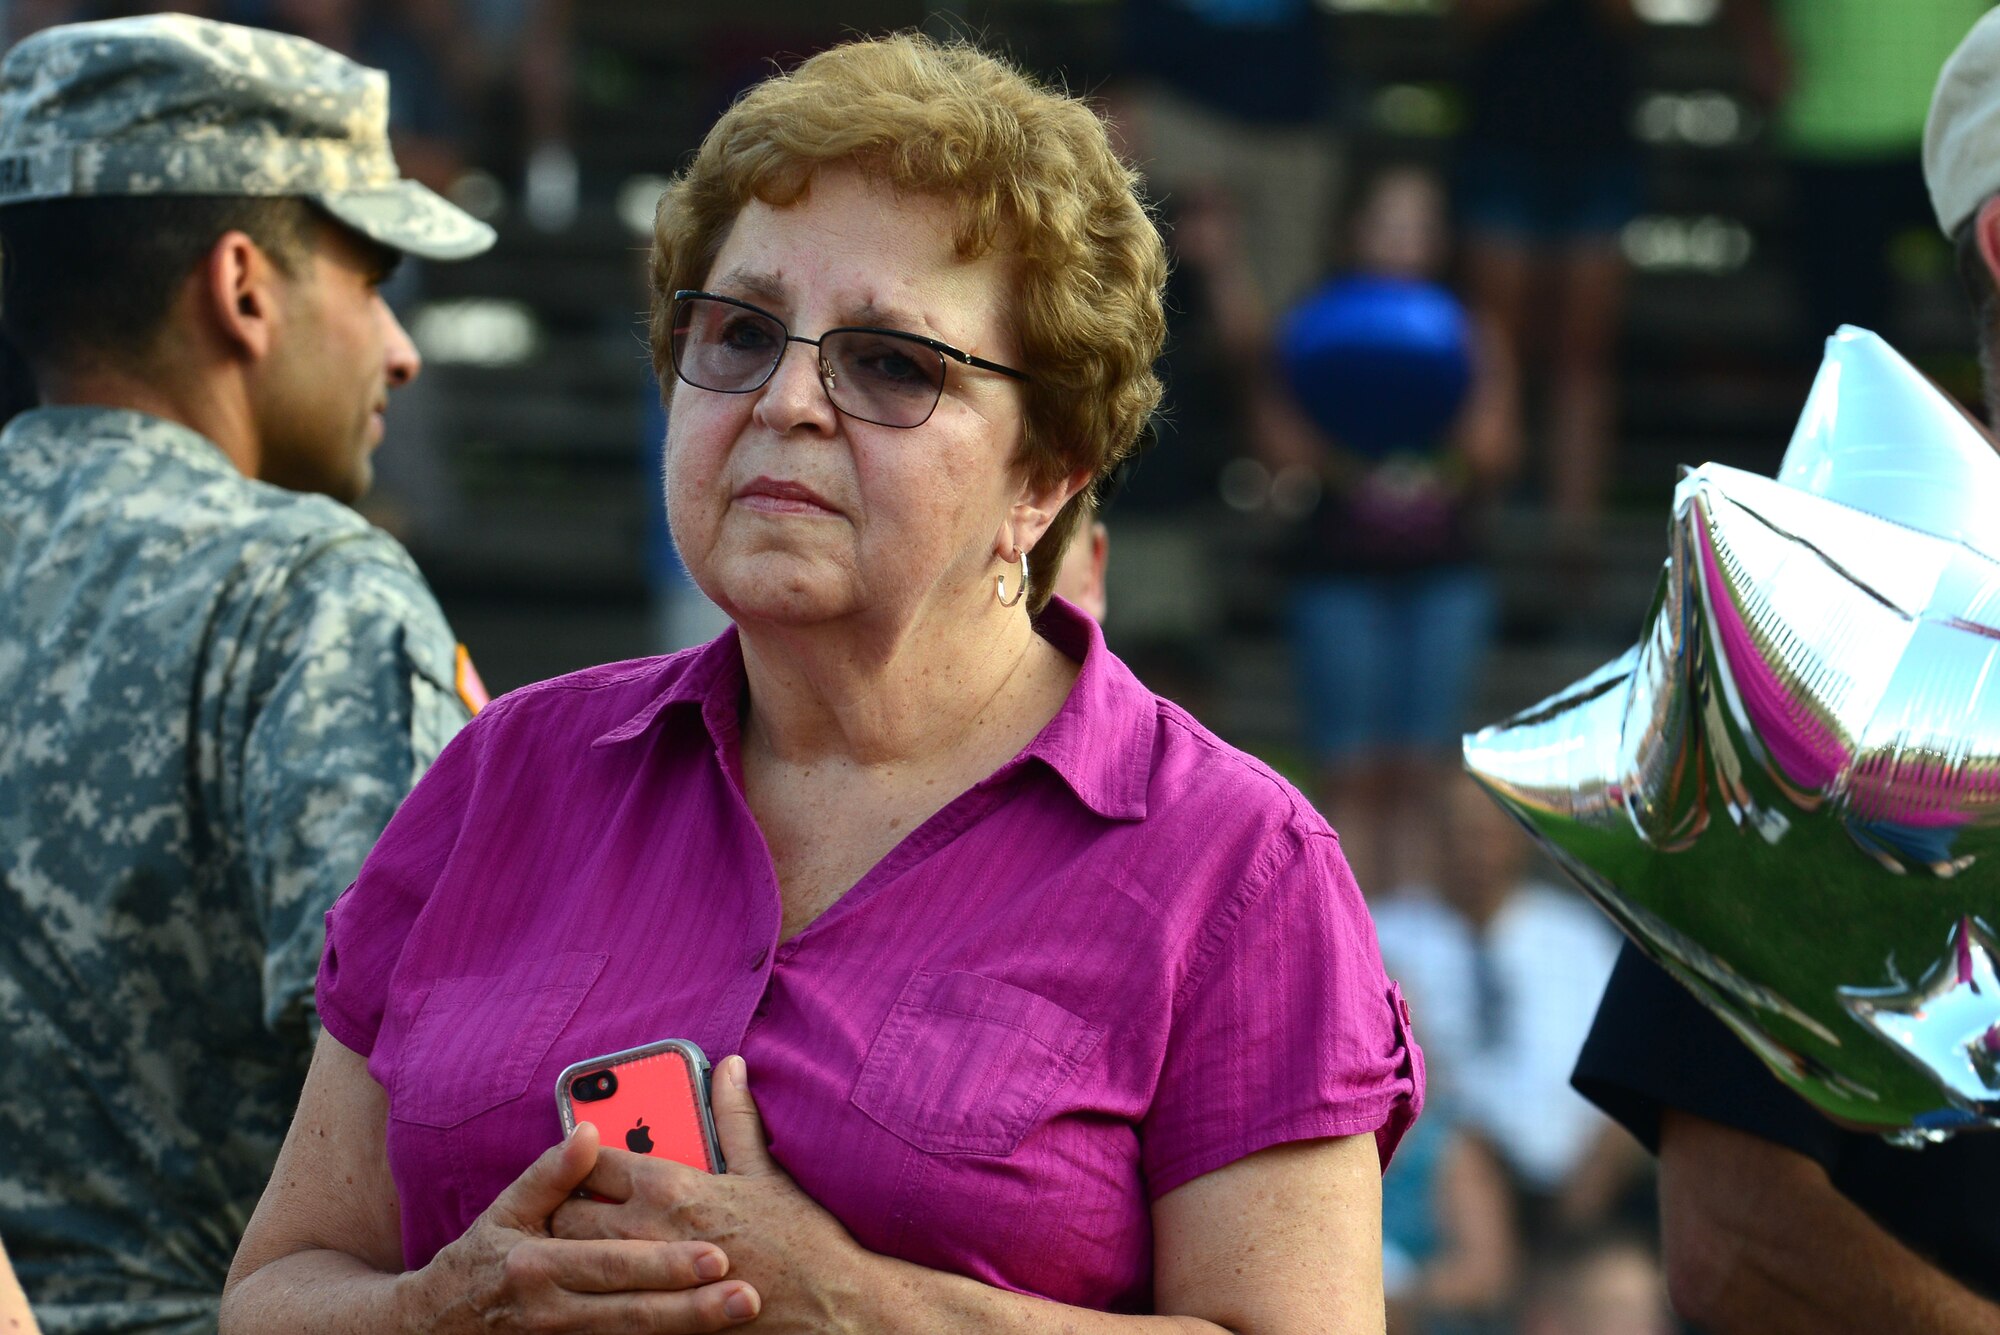 Judy Rynal, mother of the late U.S. Army Sgt. Caryn Nouv, who was killed in action July 27, 2013, reflects on memories of her daughter during the Peninsula Pilot baseball team’s 2nd Annual Gold Star Family Appreciation Night in Hampton, Va., July 23, 2014. The Fort Eustis Gold Star Family program helps families of deceased Service members with funeral planning, finances and counseling services needed to cope with their loss.  (U.S. Air Force photo by Airman 1st Class Kimberly Nagle/Released)